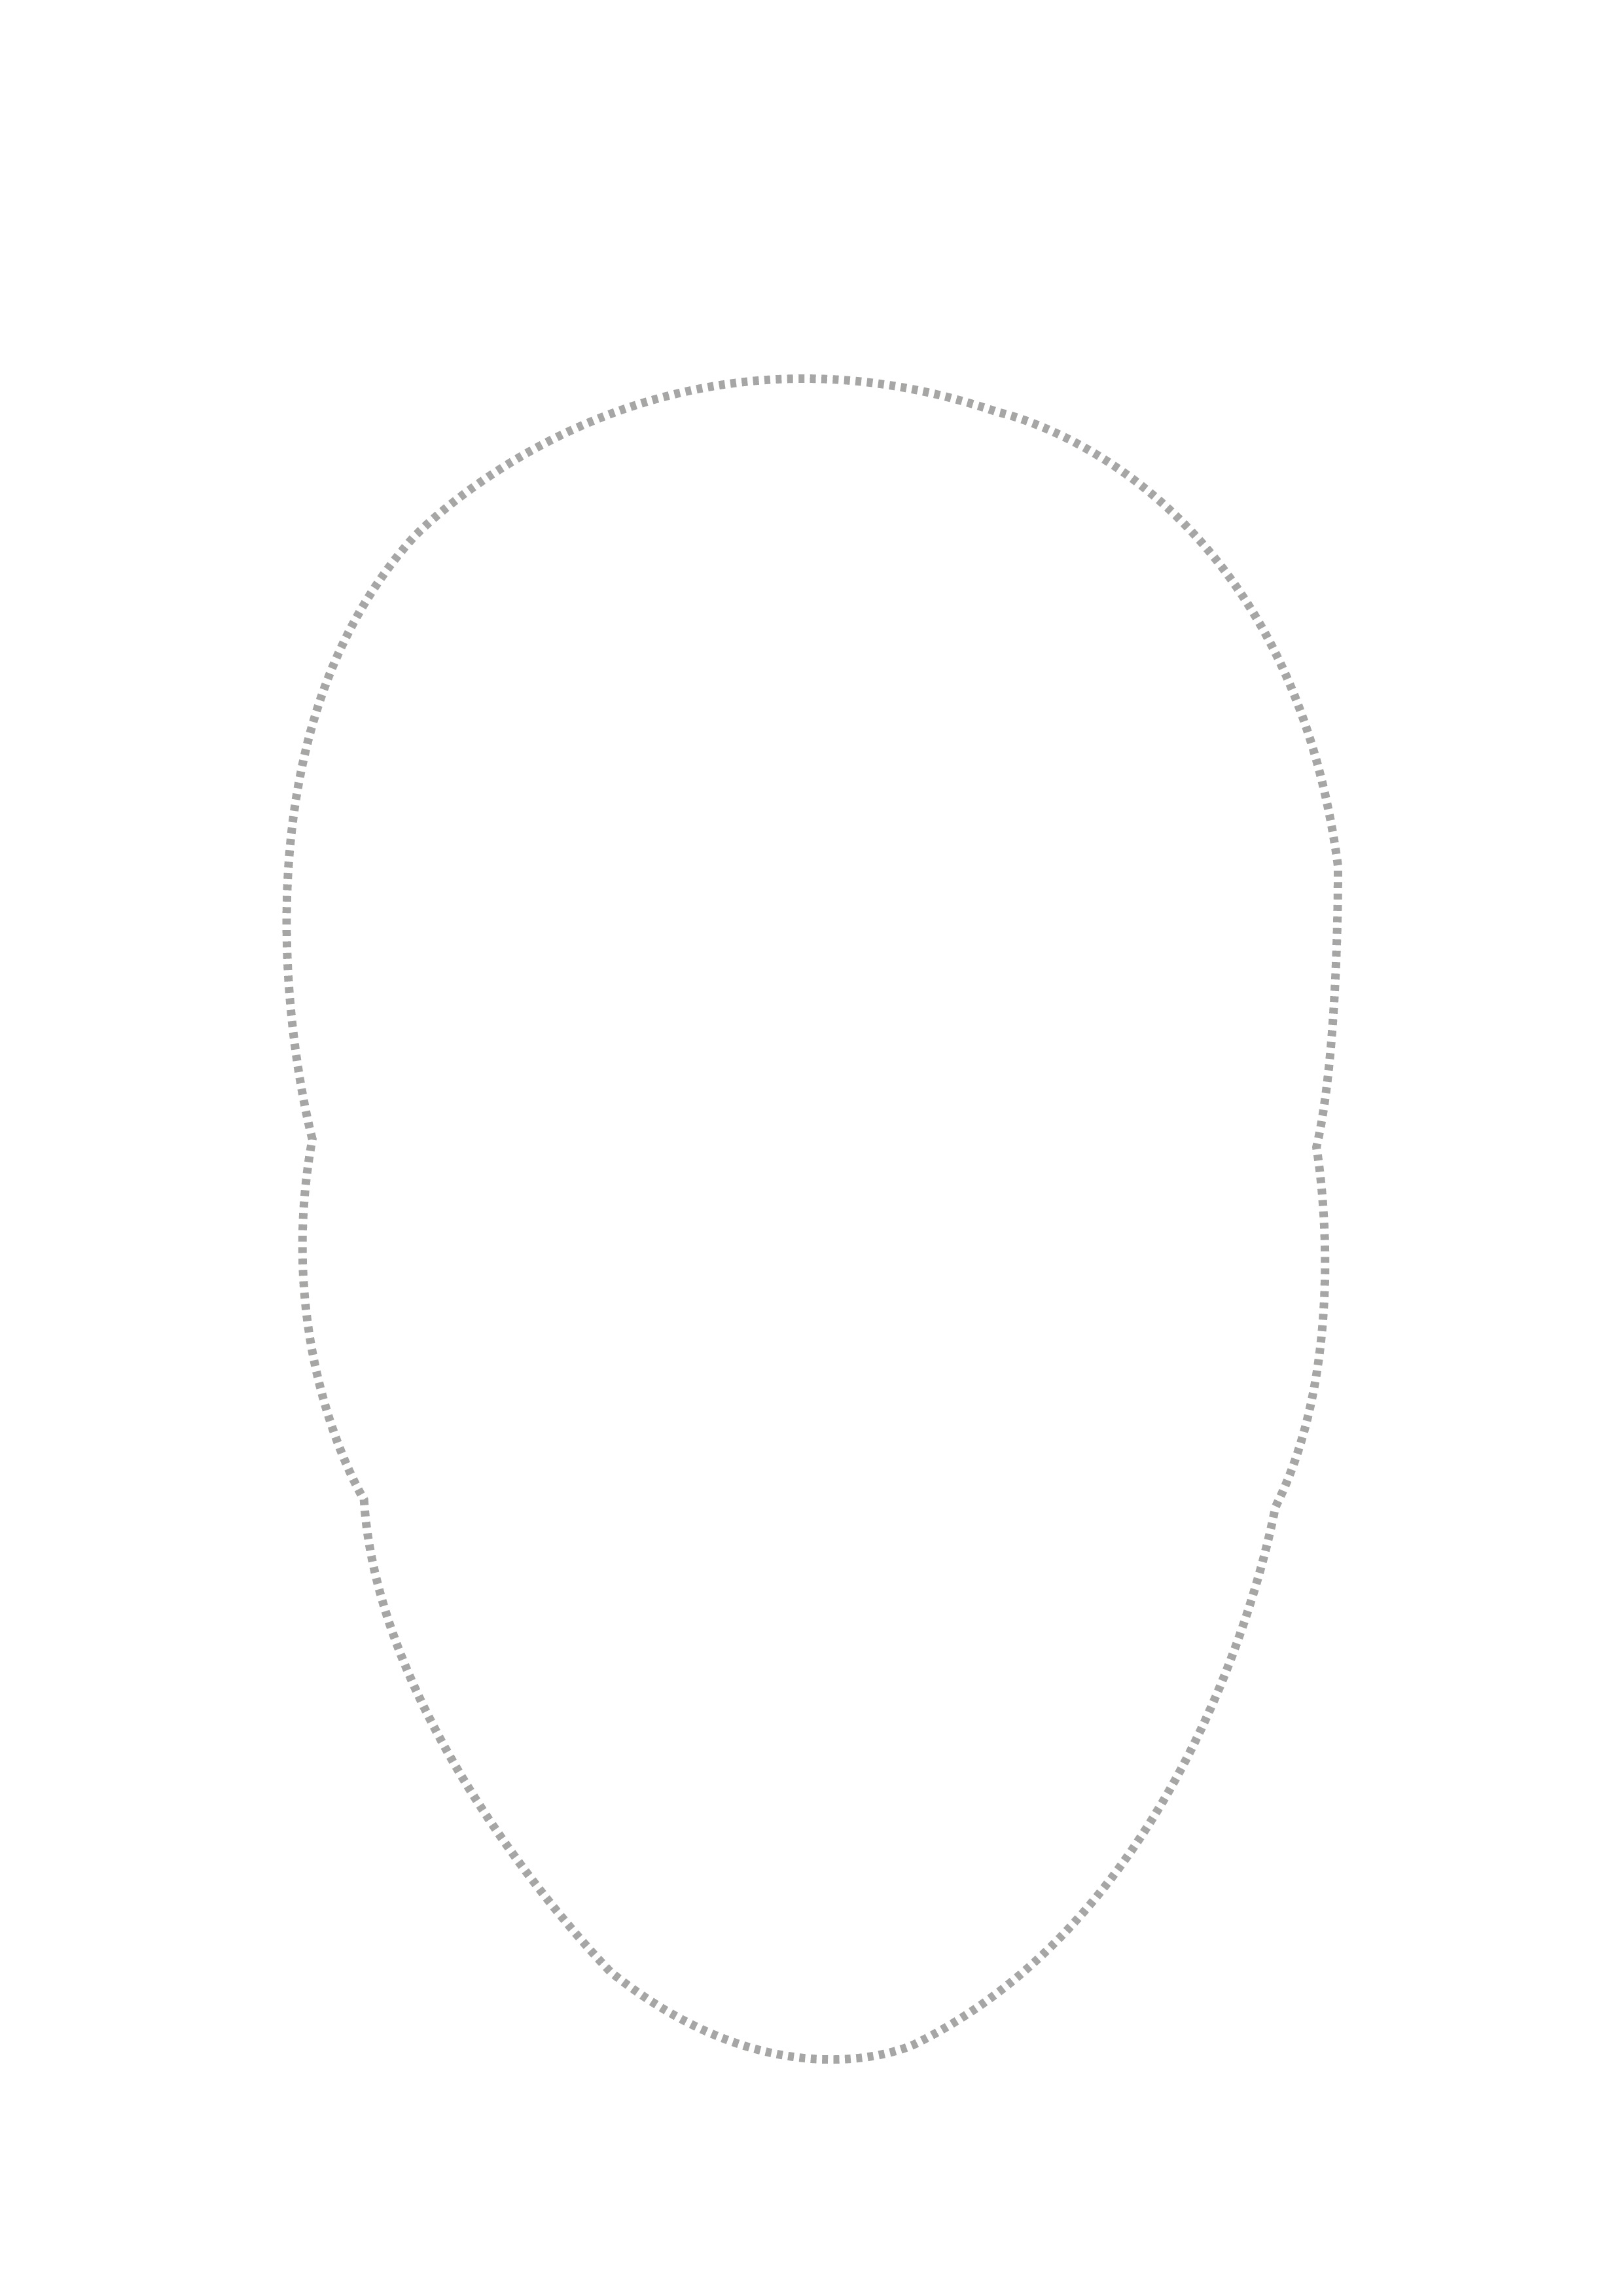 Free Outline Of Face Template, Download Free Outline Of Face Template